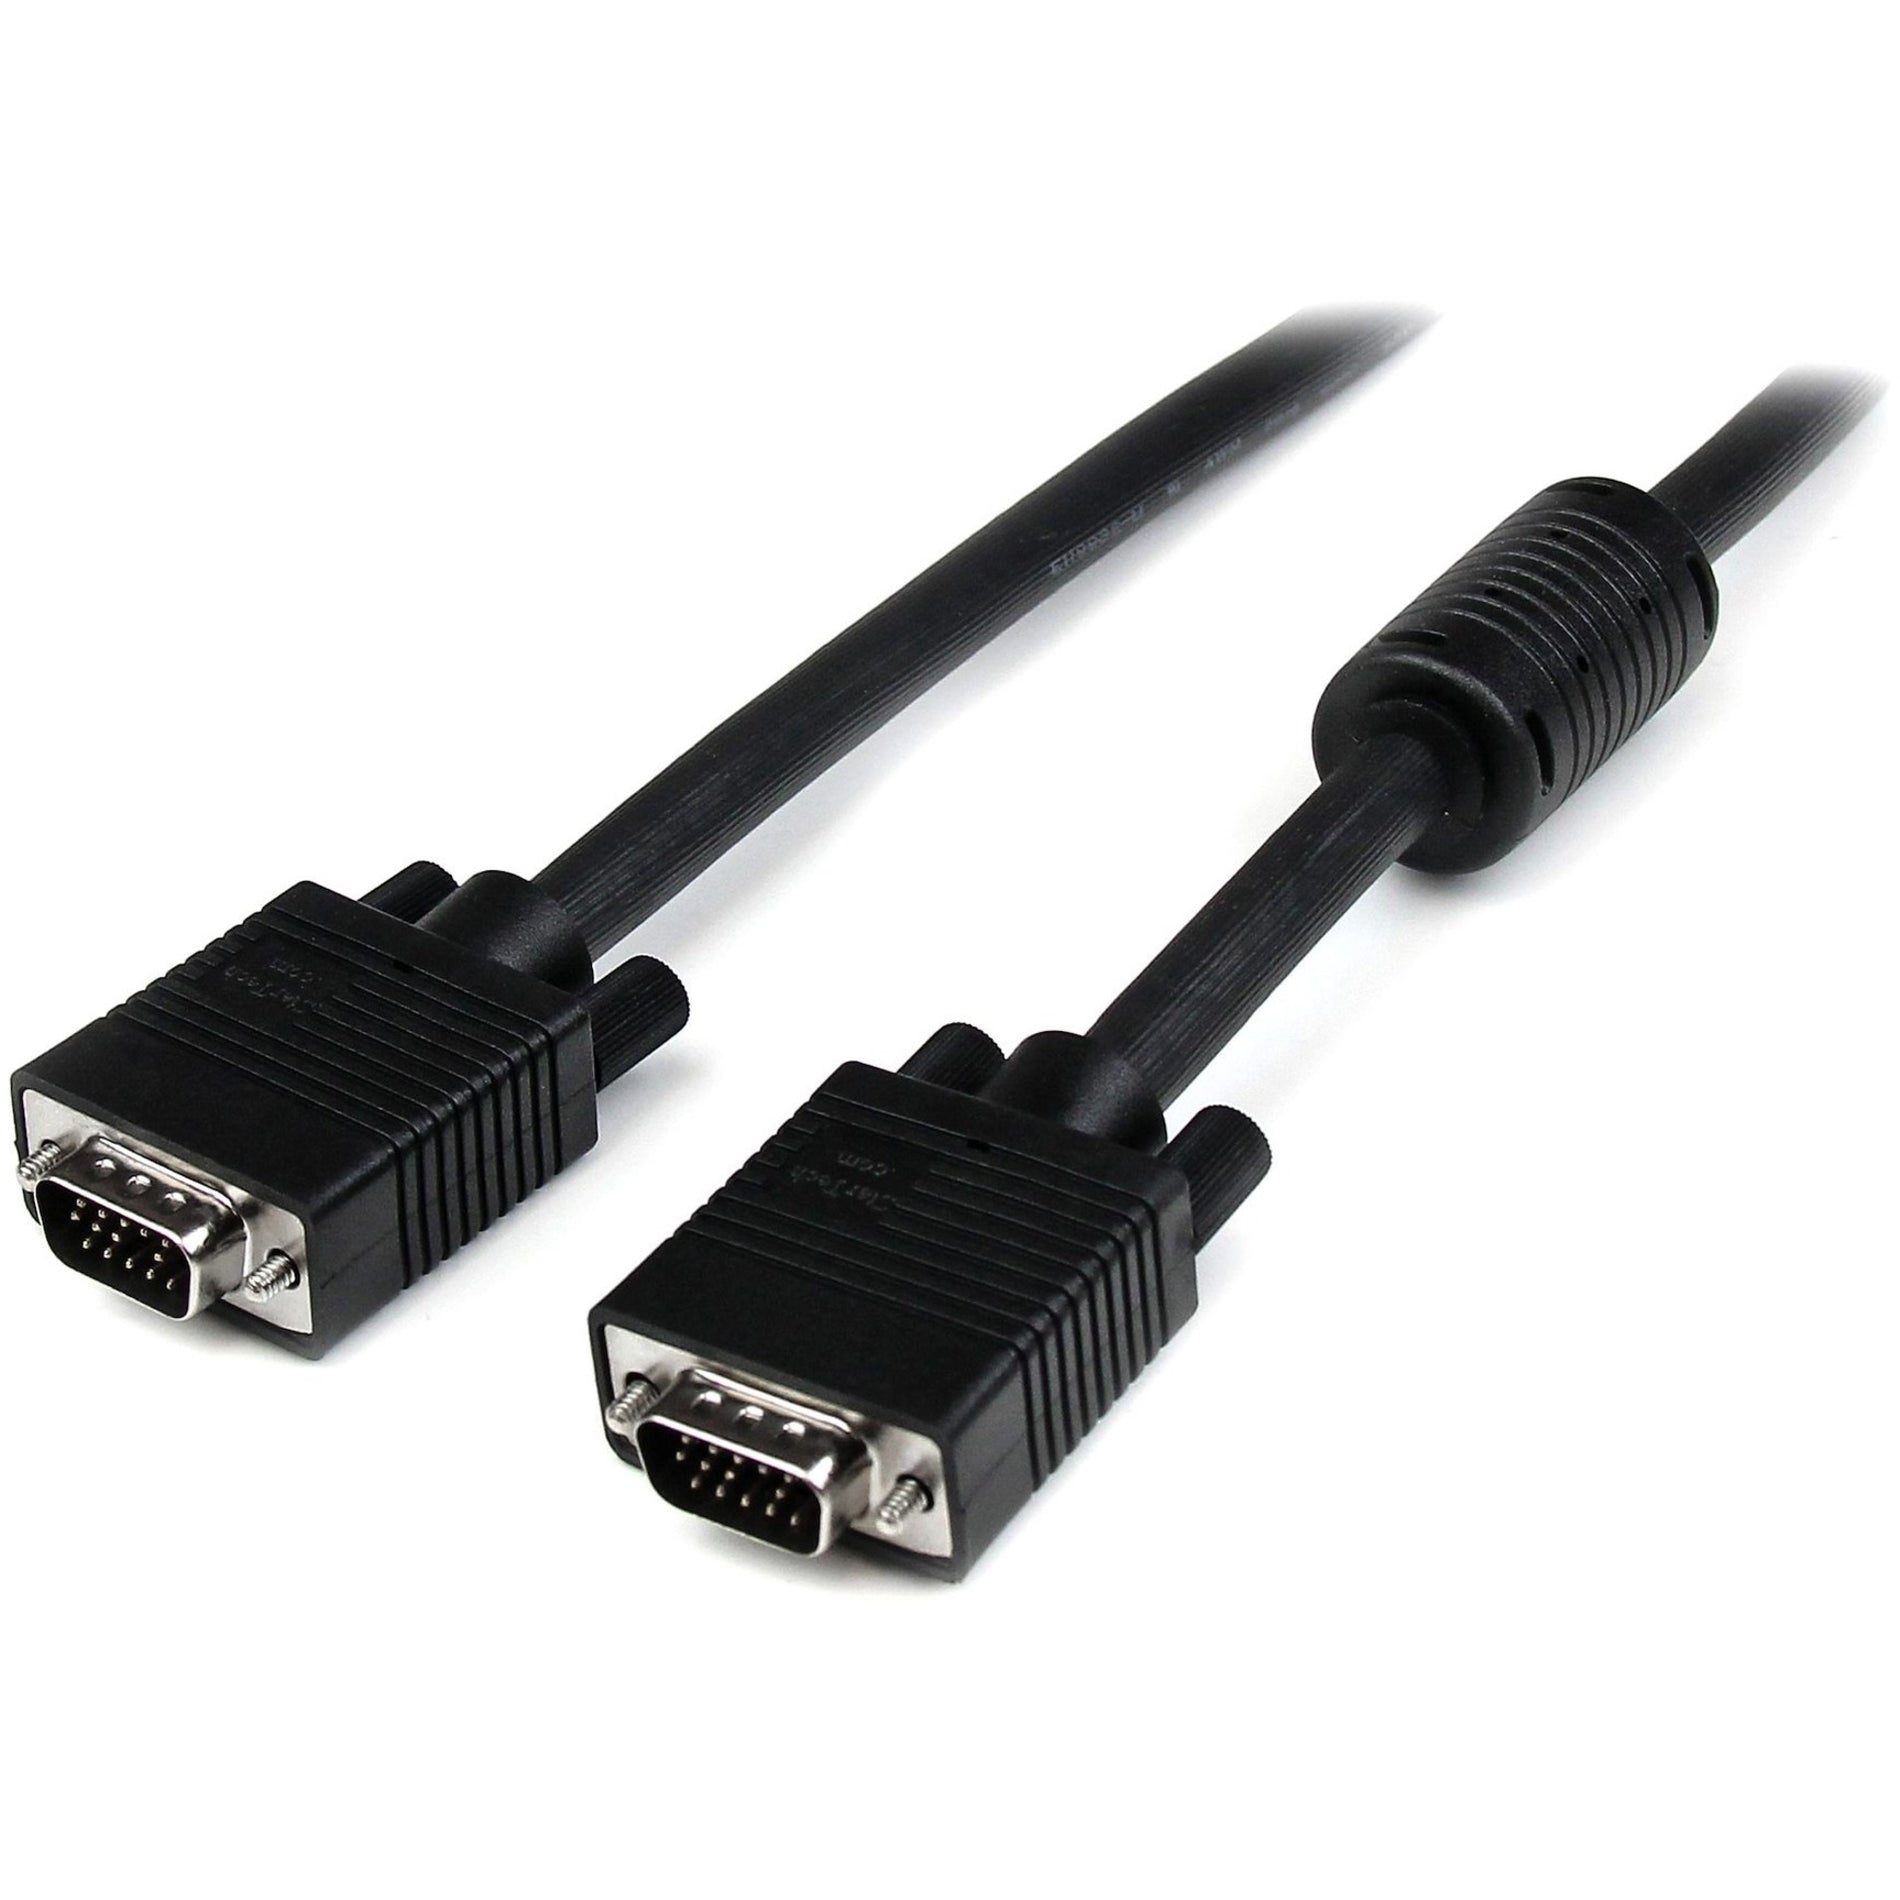 StarTech.com MXT101MMHQ40 40 ft Coax High Resolution VGA Monitor Cable - HD15 M/M, Molded, EMI Protection, Strain Relief [Discontinued]